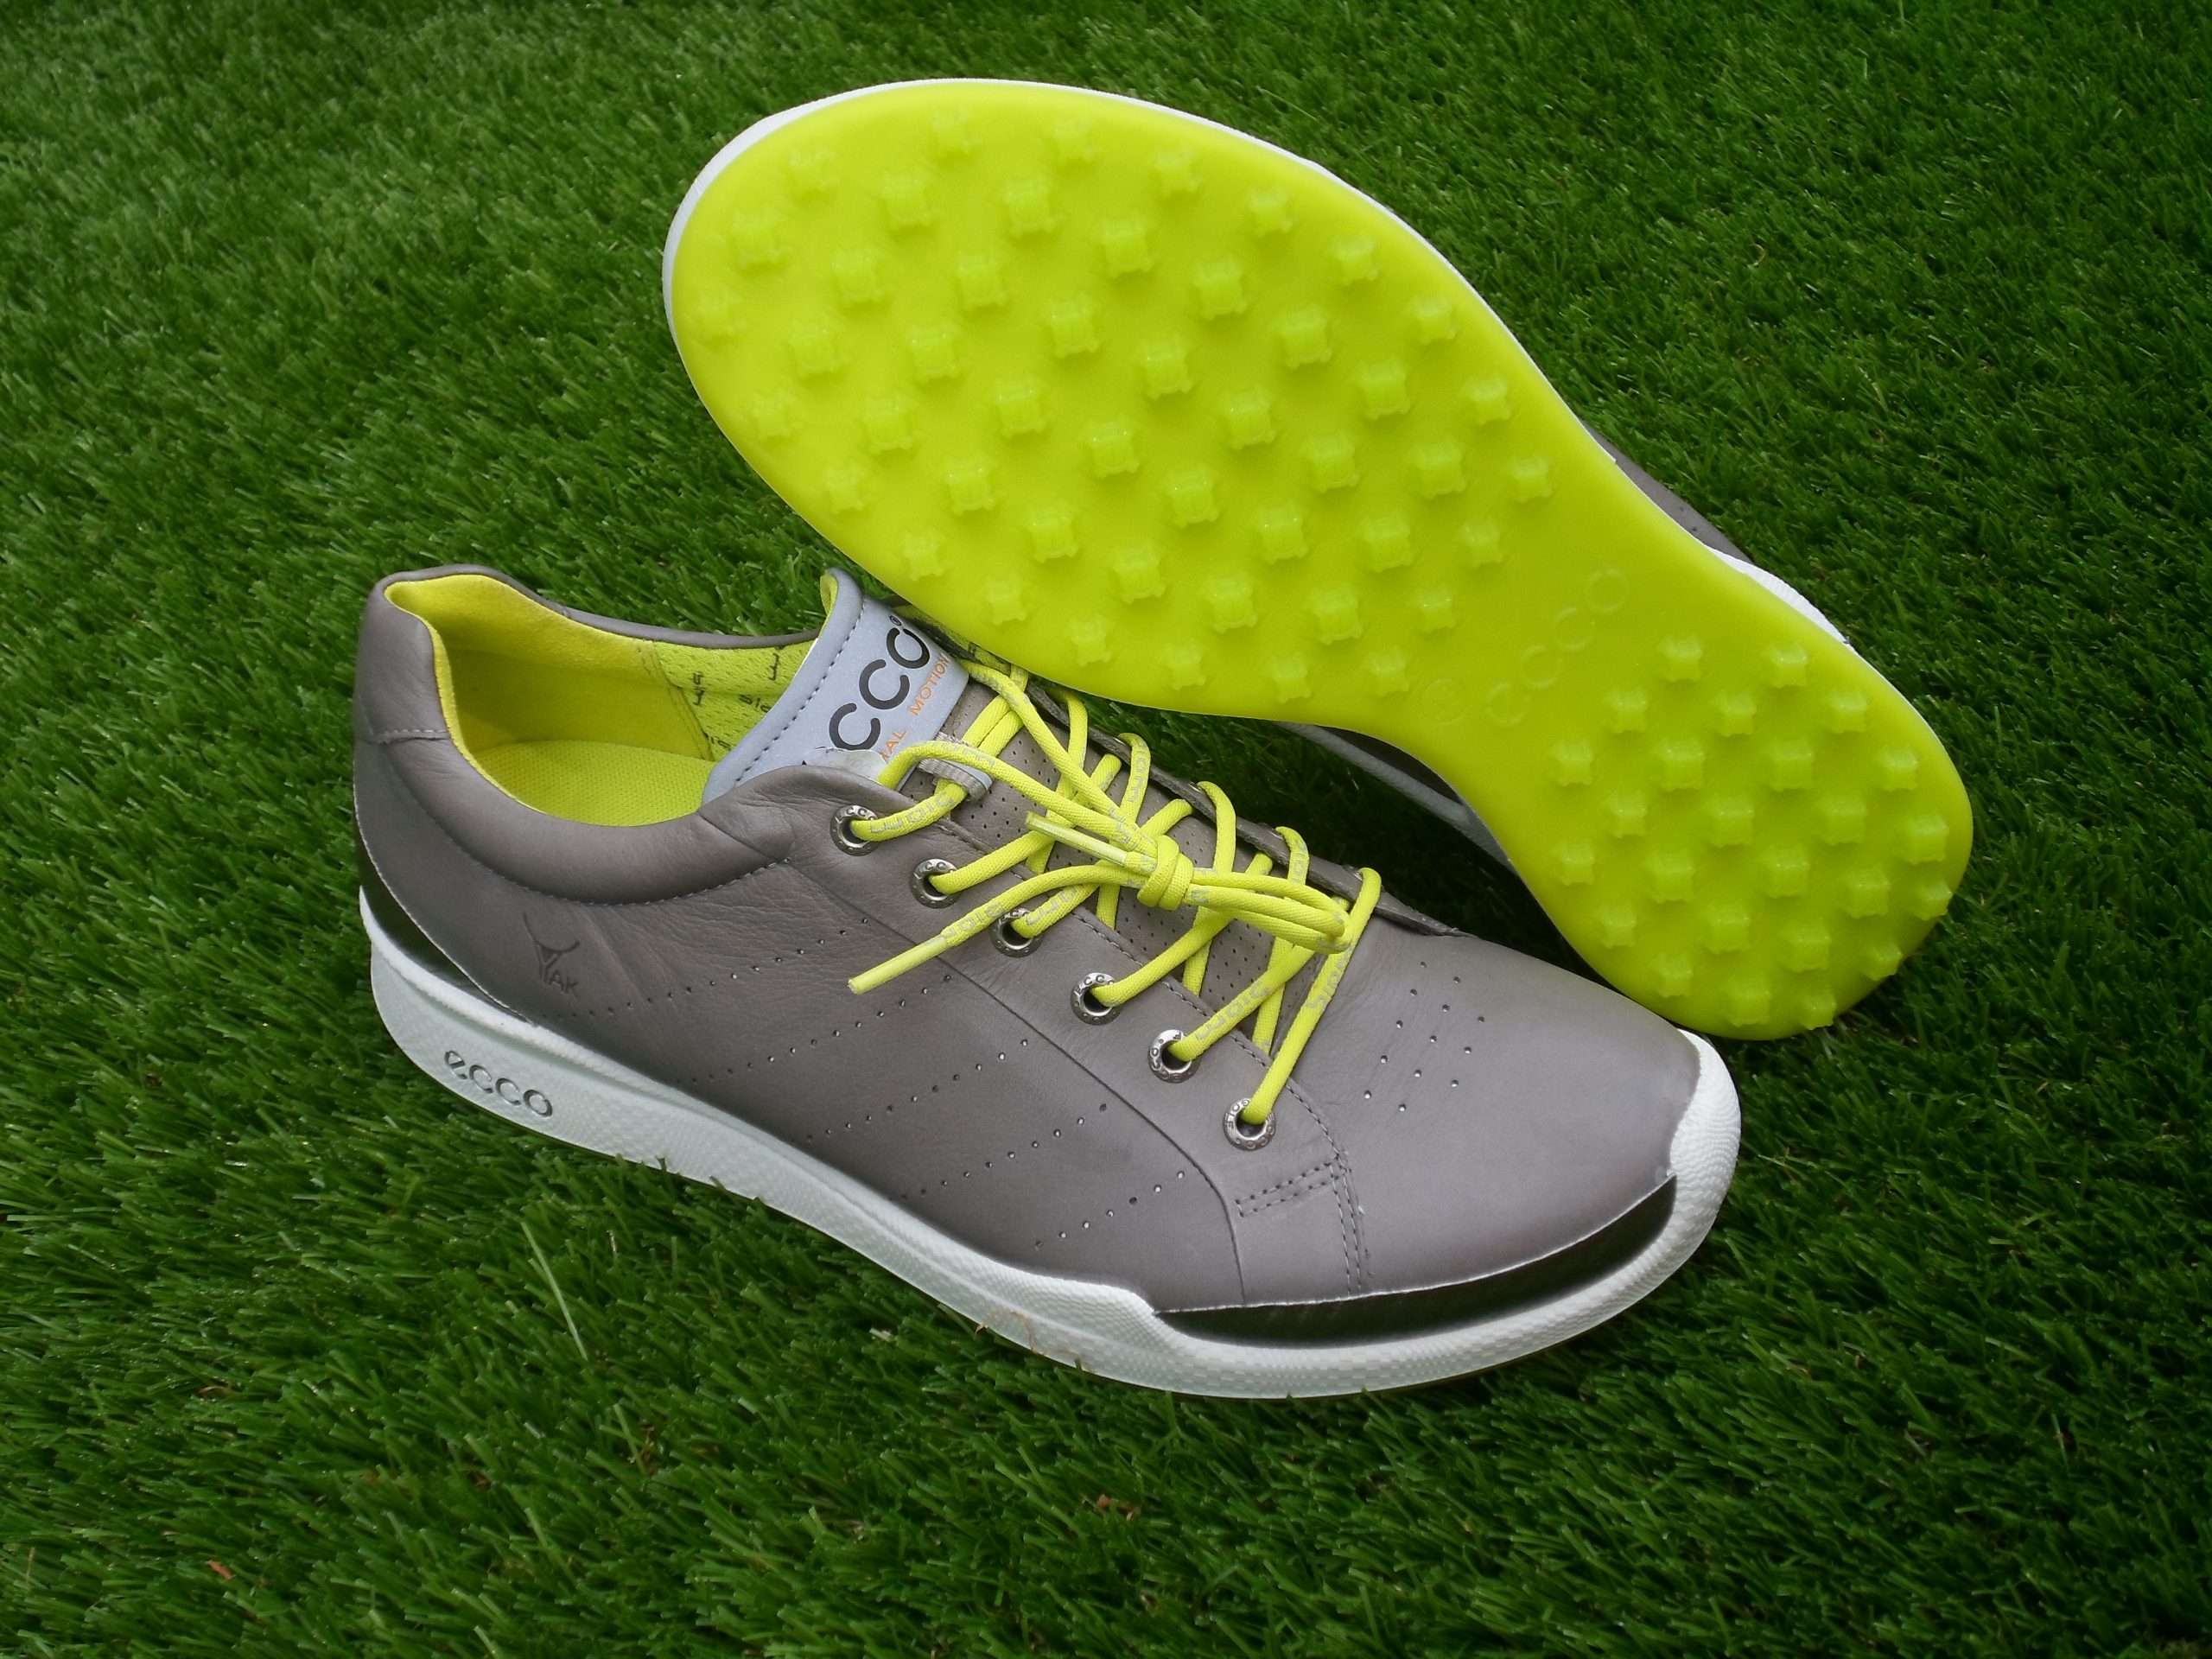 Best Golf shoes review 2013